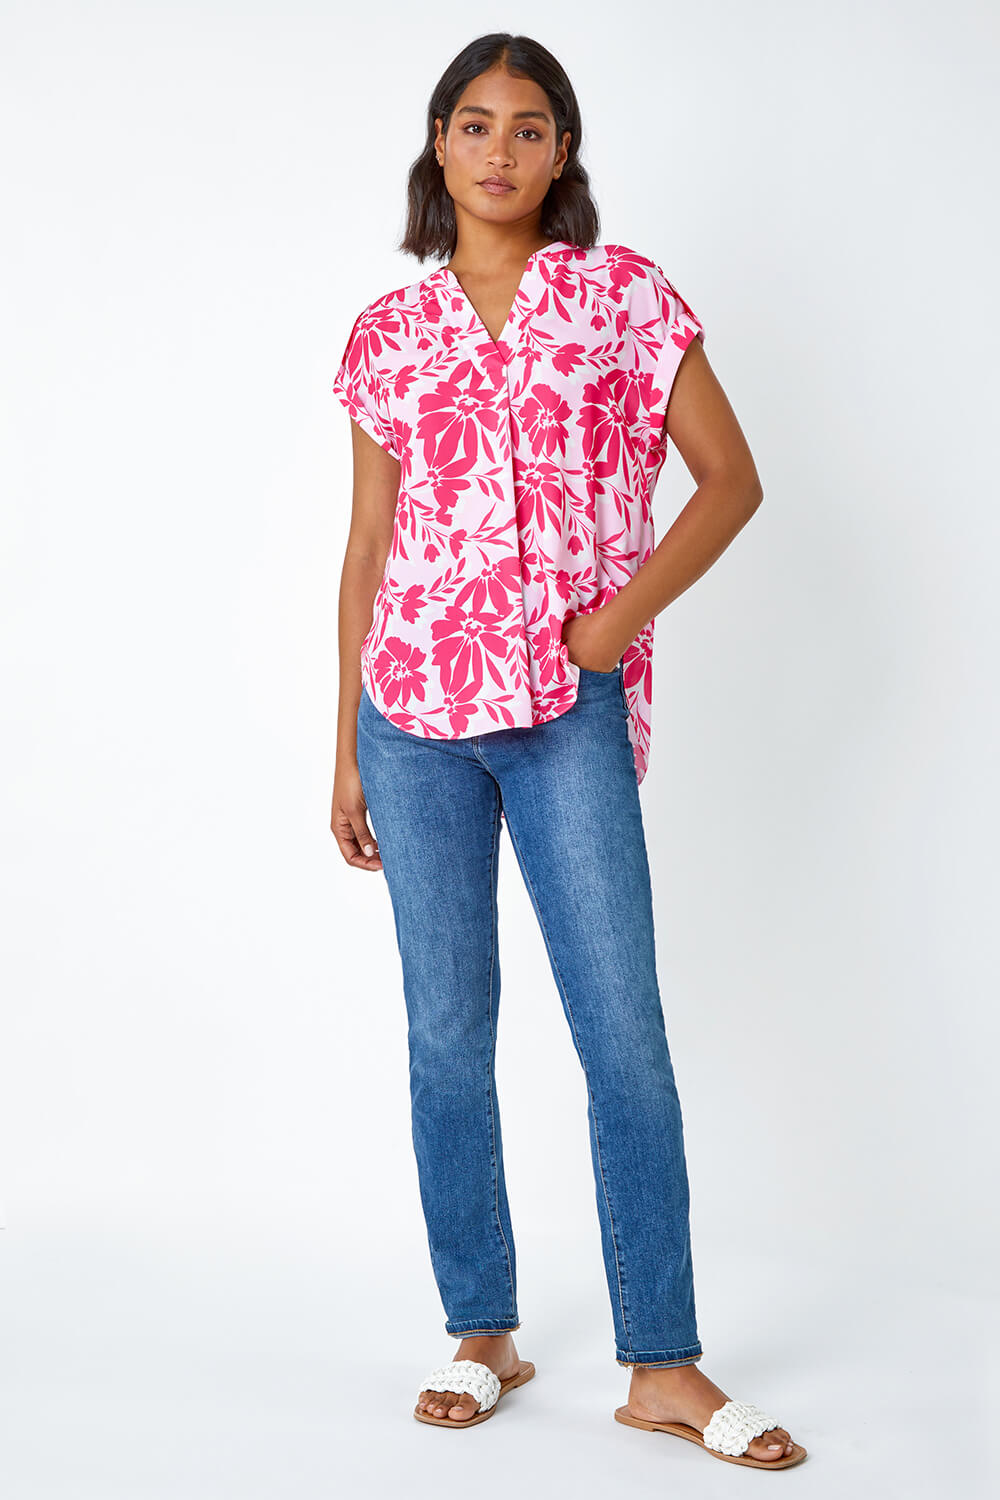 PINK Floral Print Pleat Front Top, Image 2 of 5